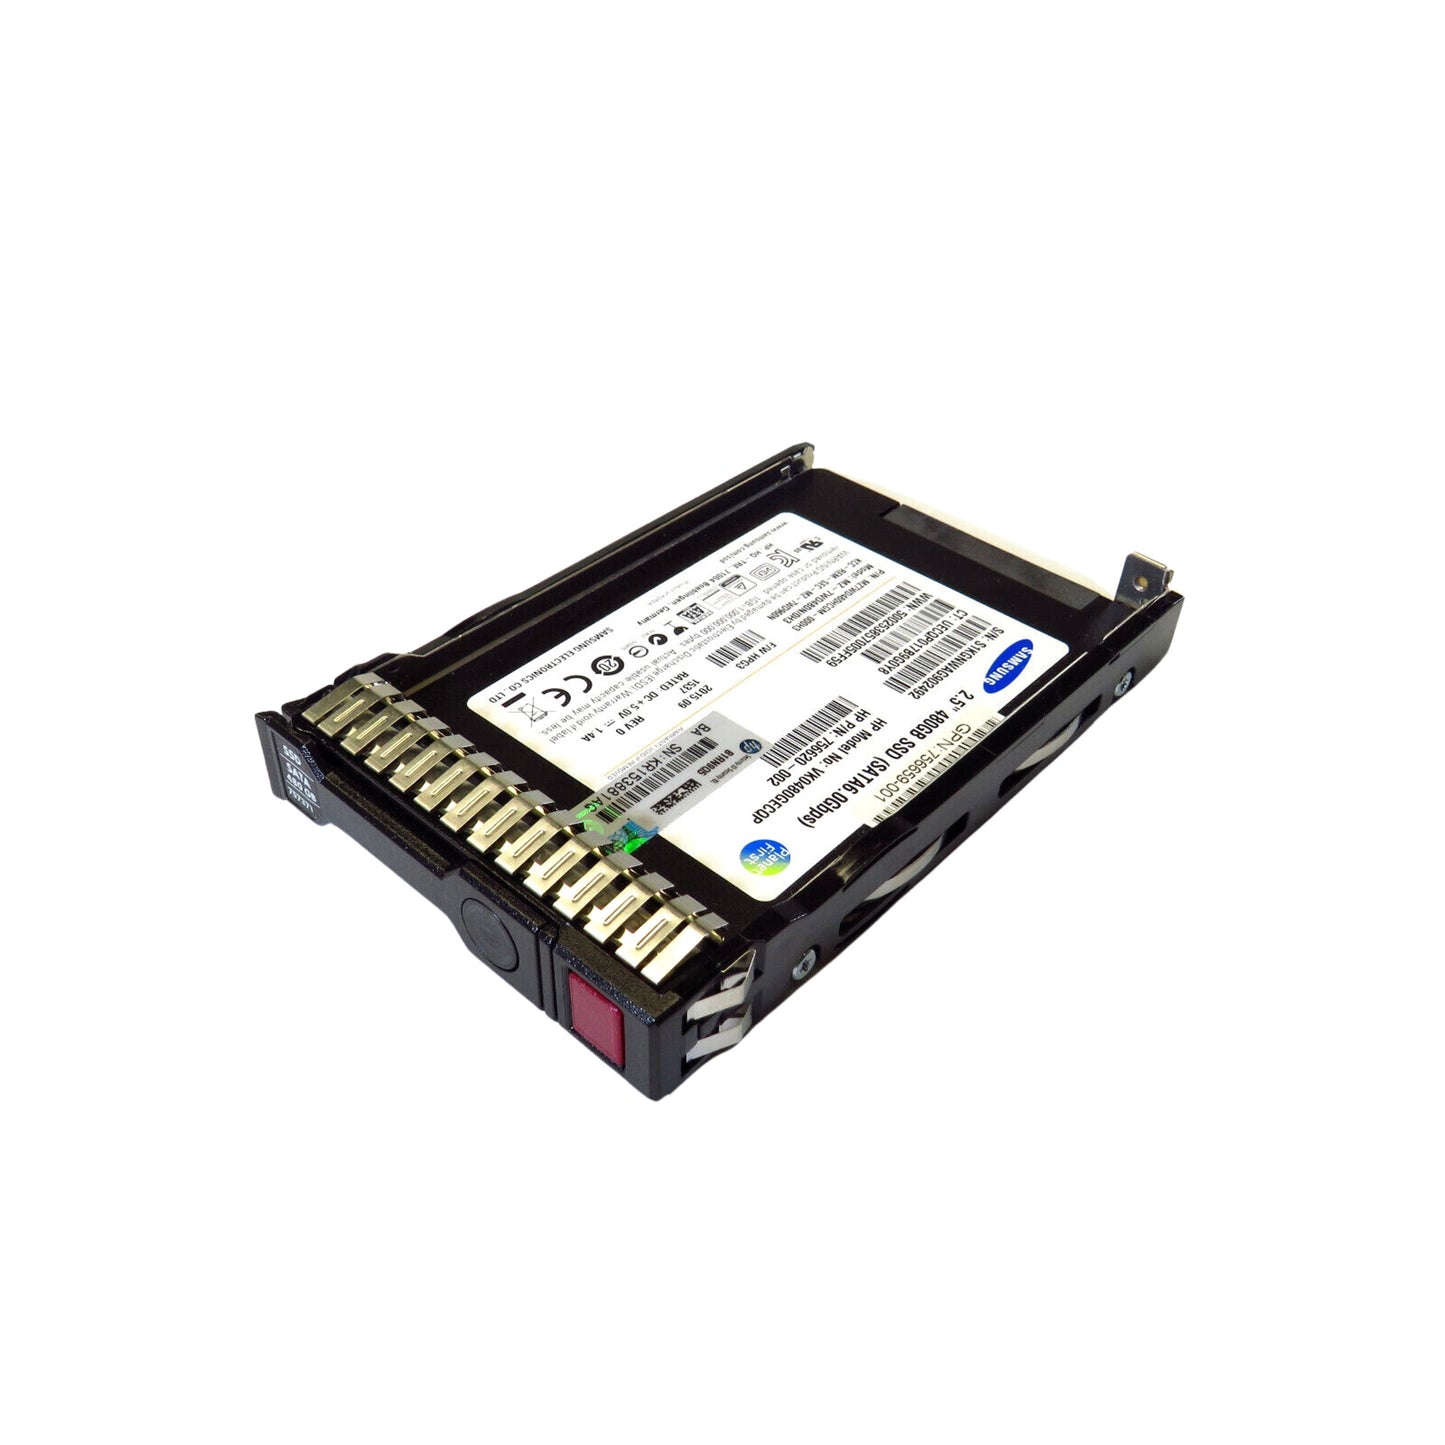 HP 757371-001 756620-002 480GB 2.5" SATA 6Gbps VE SC PLP SSD Solid State Drive (Refurbished)